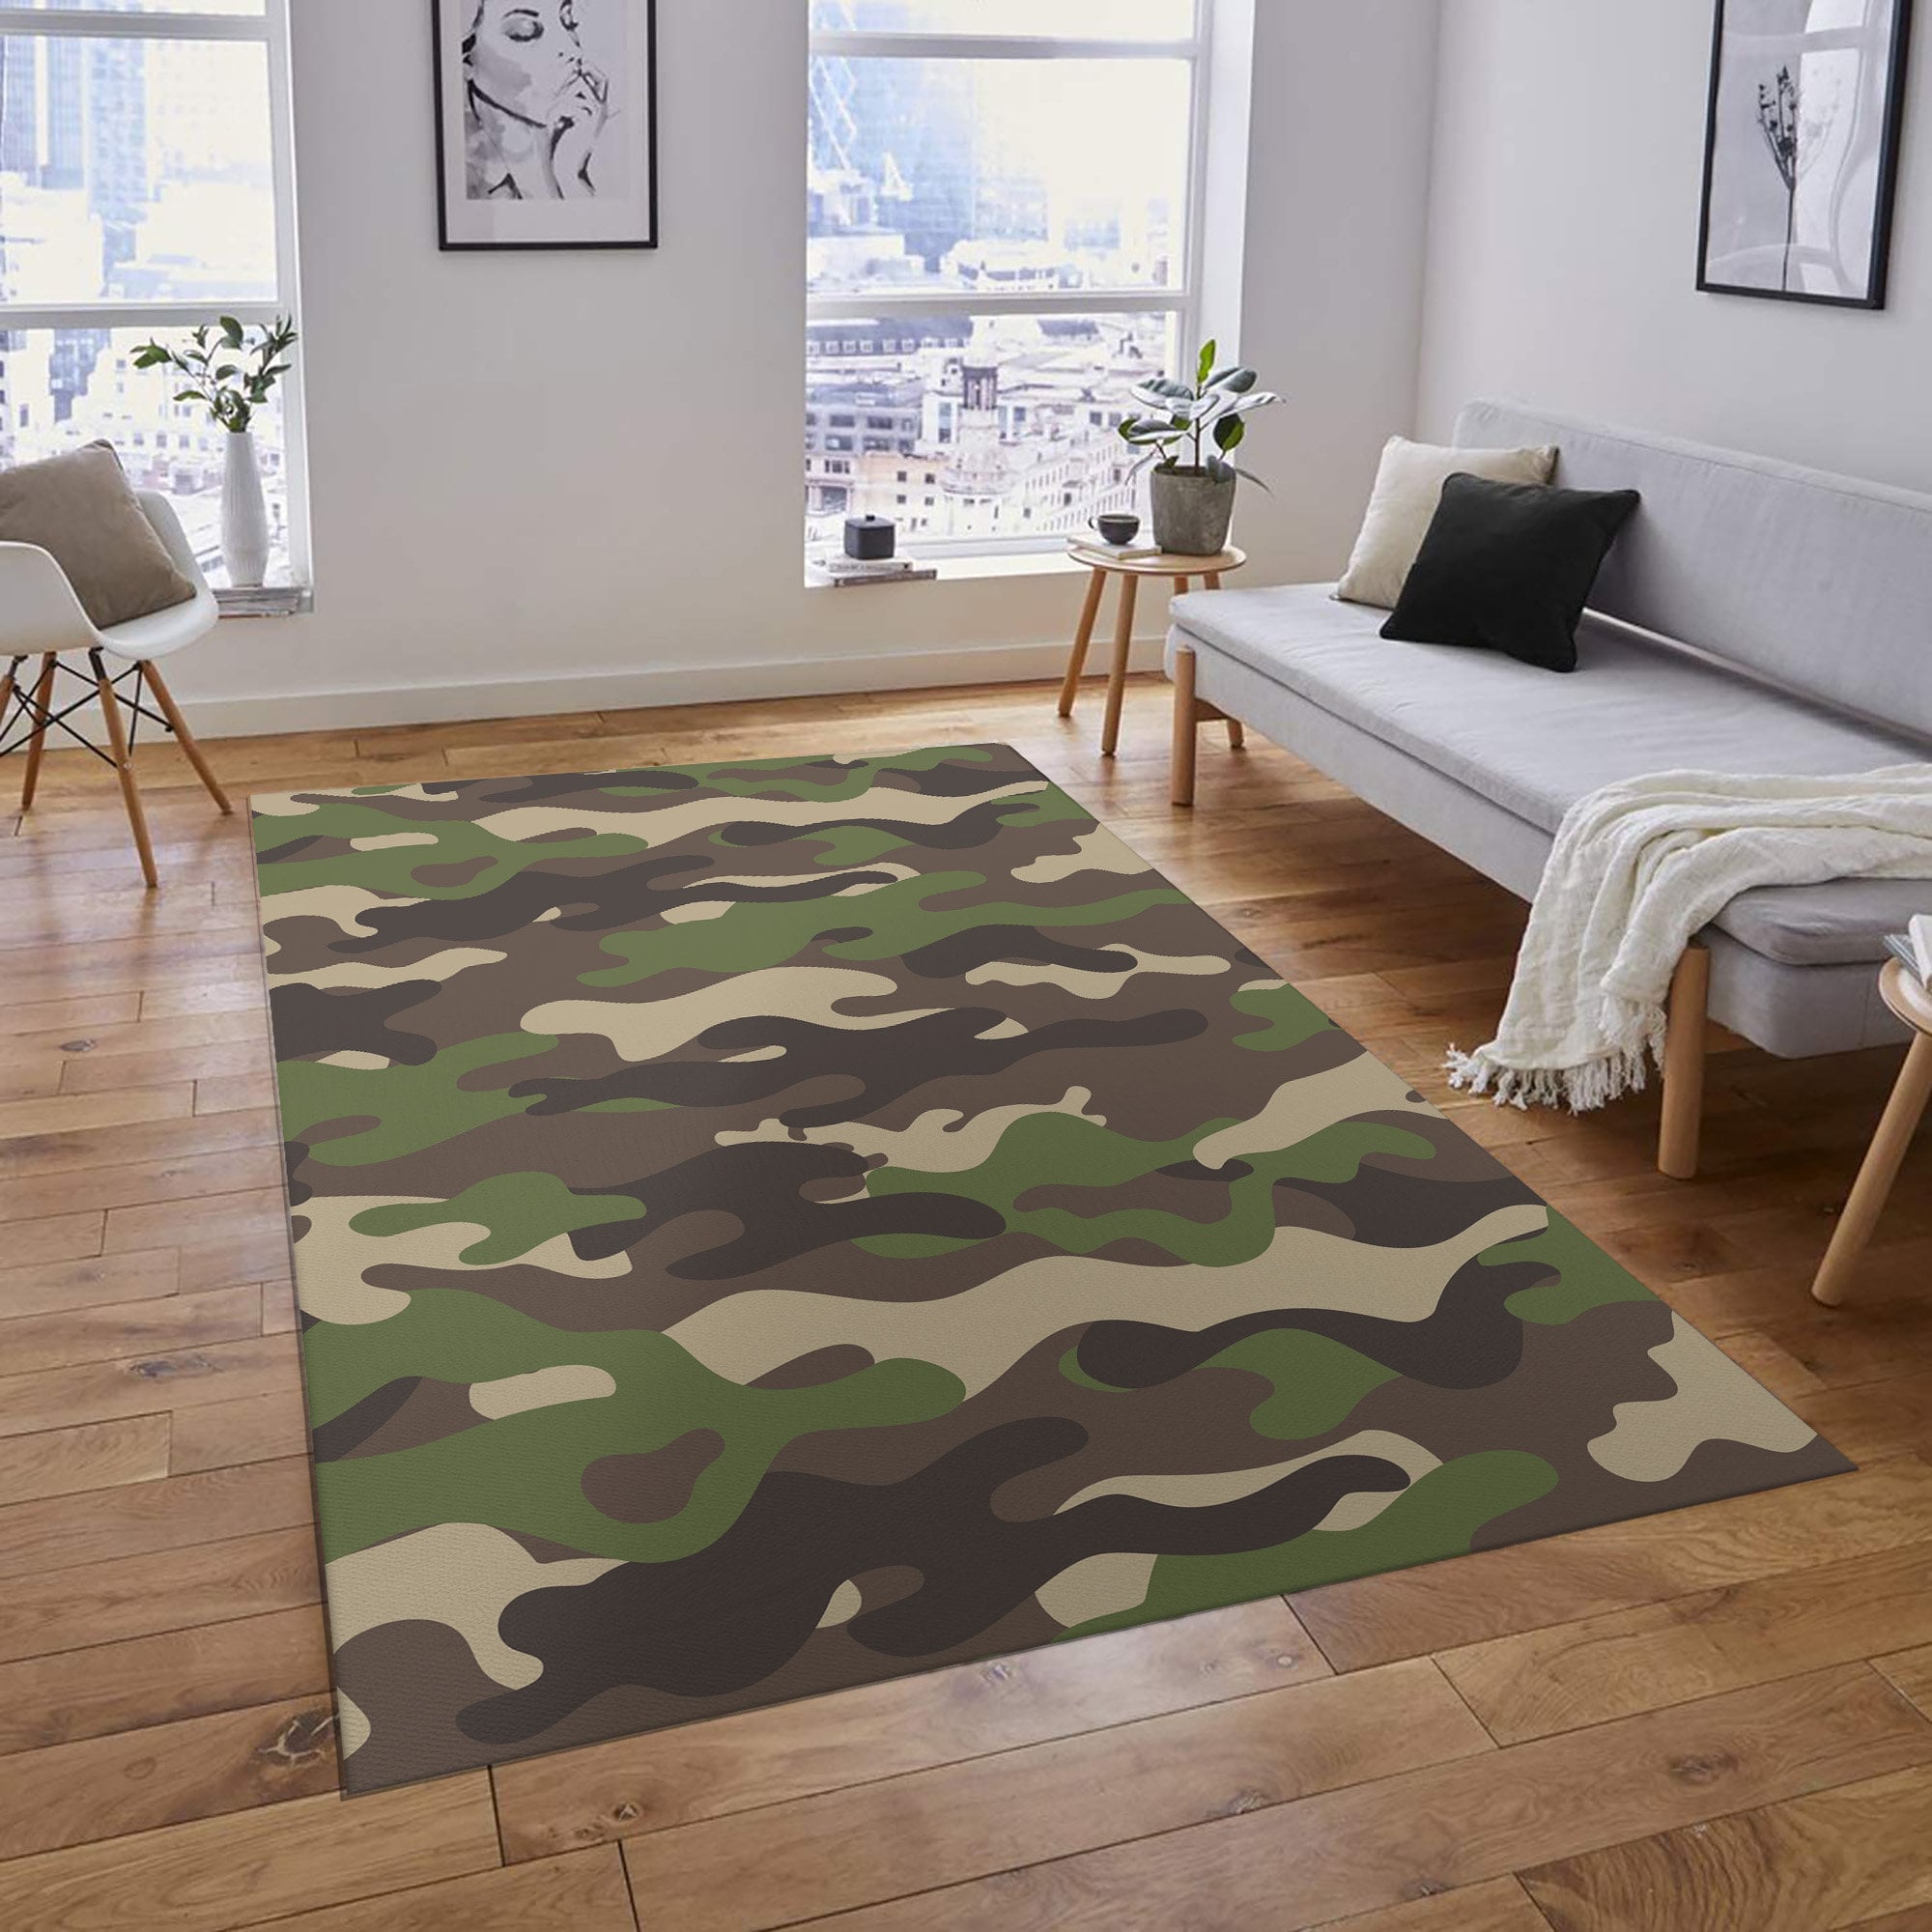 UNDEFEATED X G1950 DUCK CAMO ICON RUG 黒